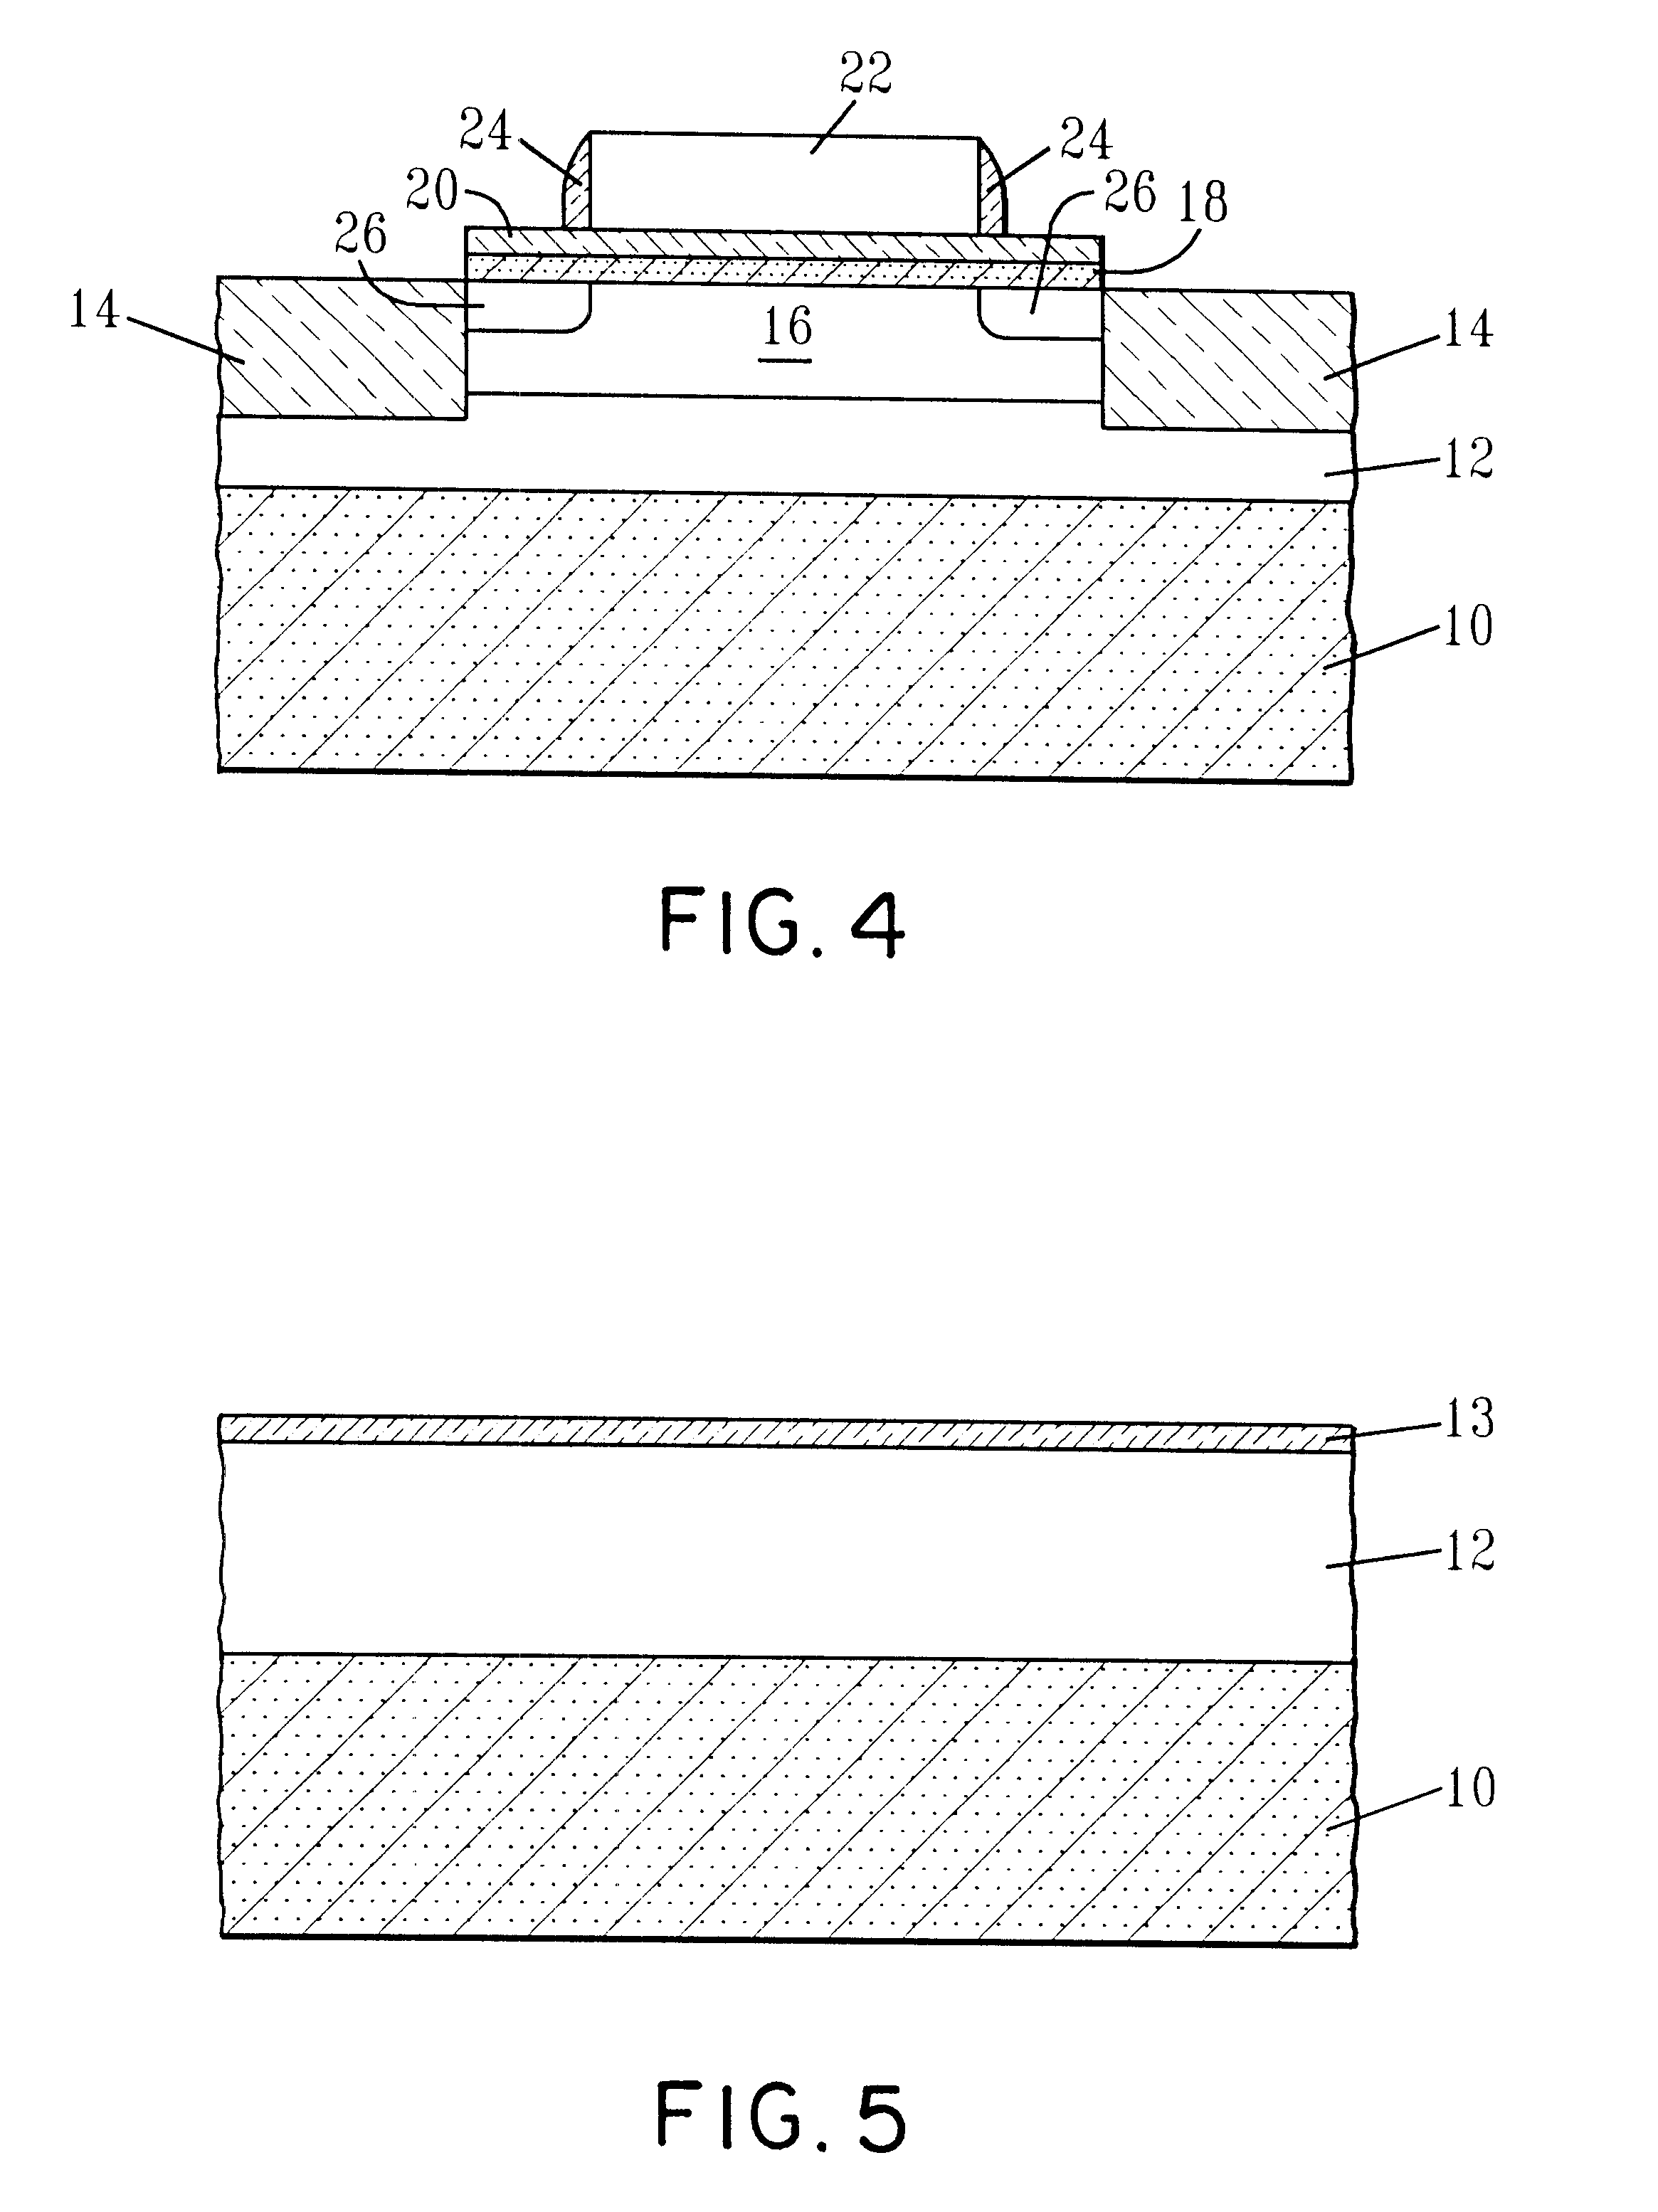 Method to fabricate a strained Si CMOS structure using selective epitaxial deposition of Si after device isolation formation